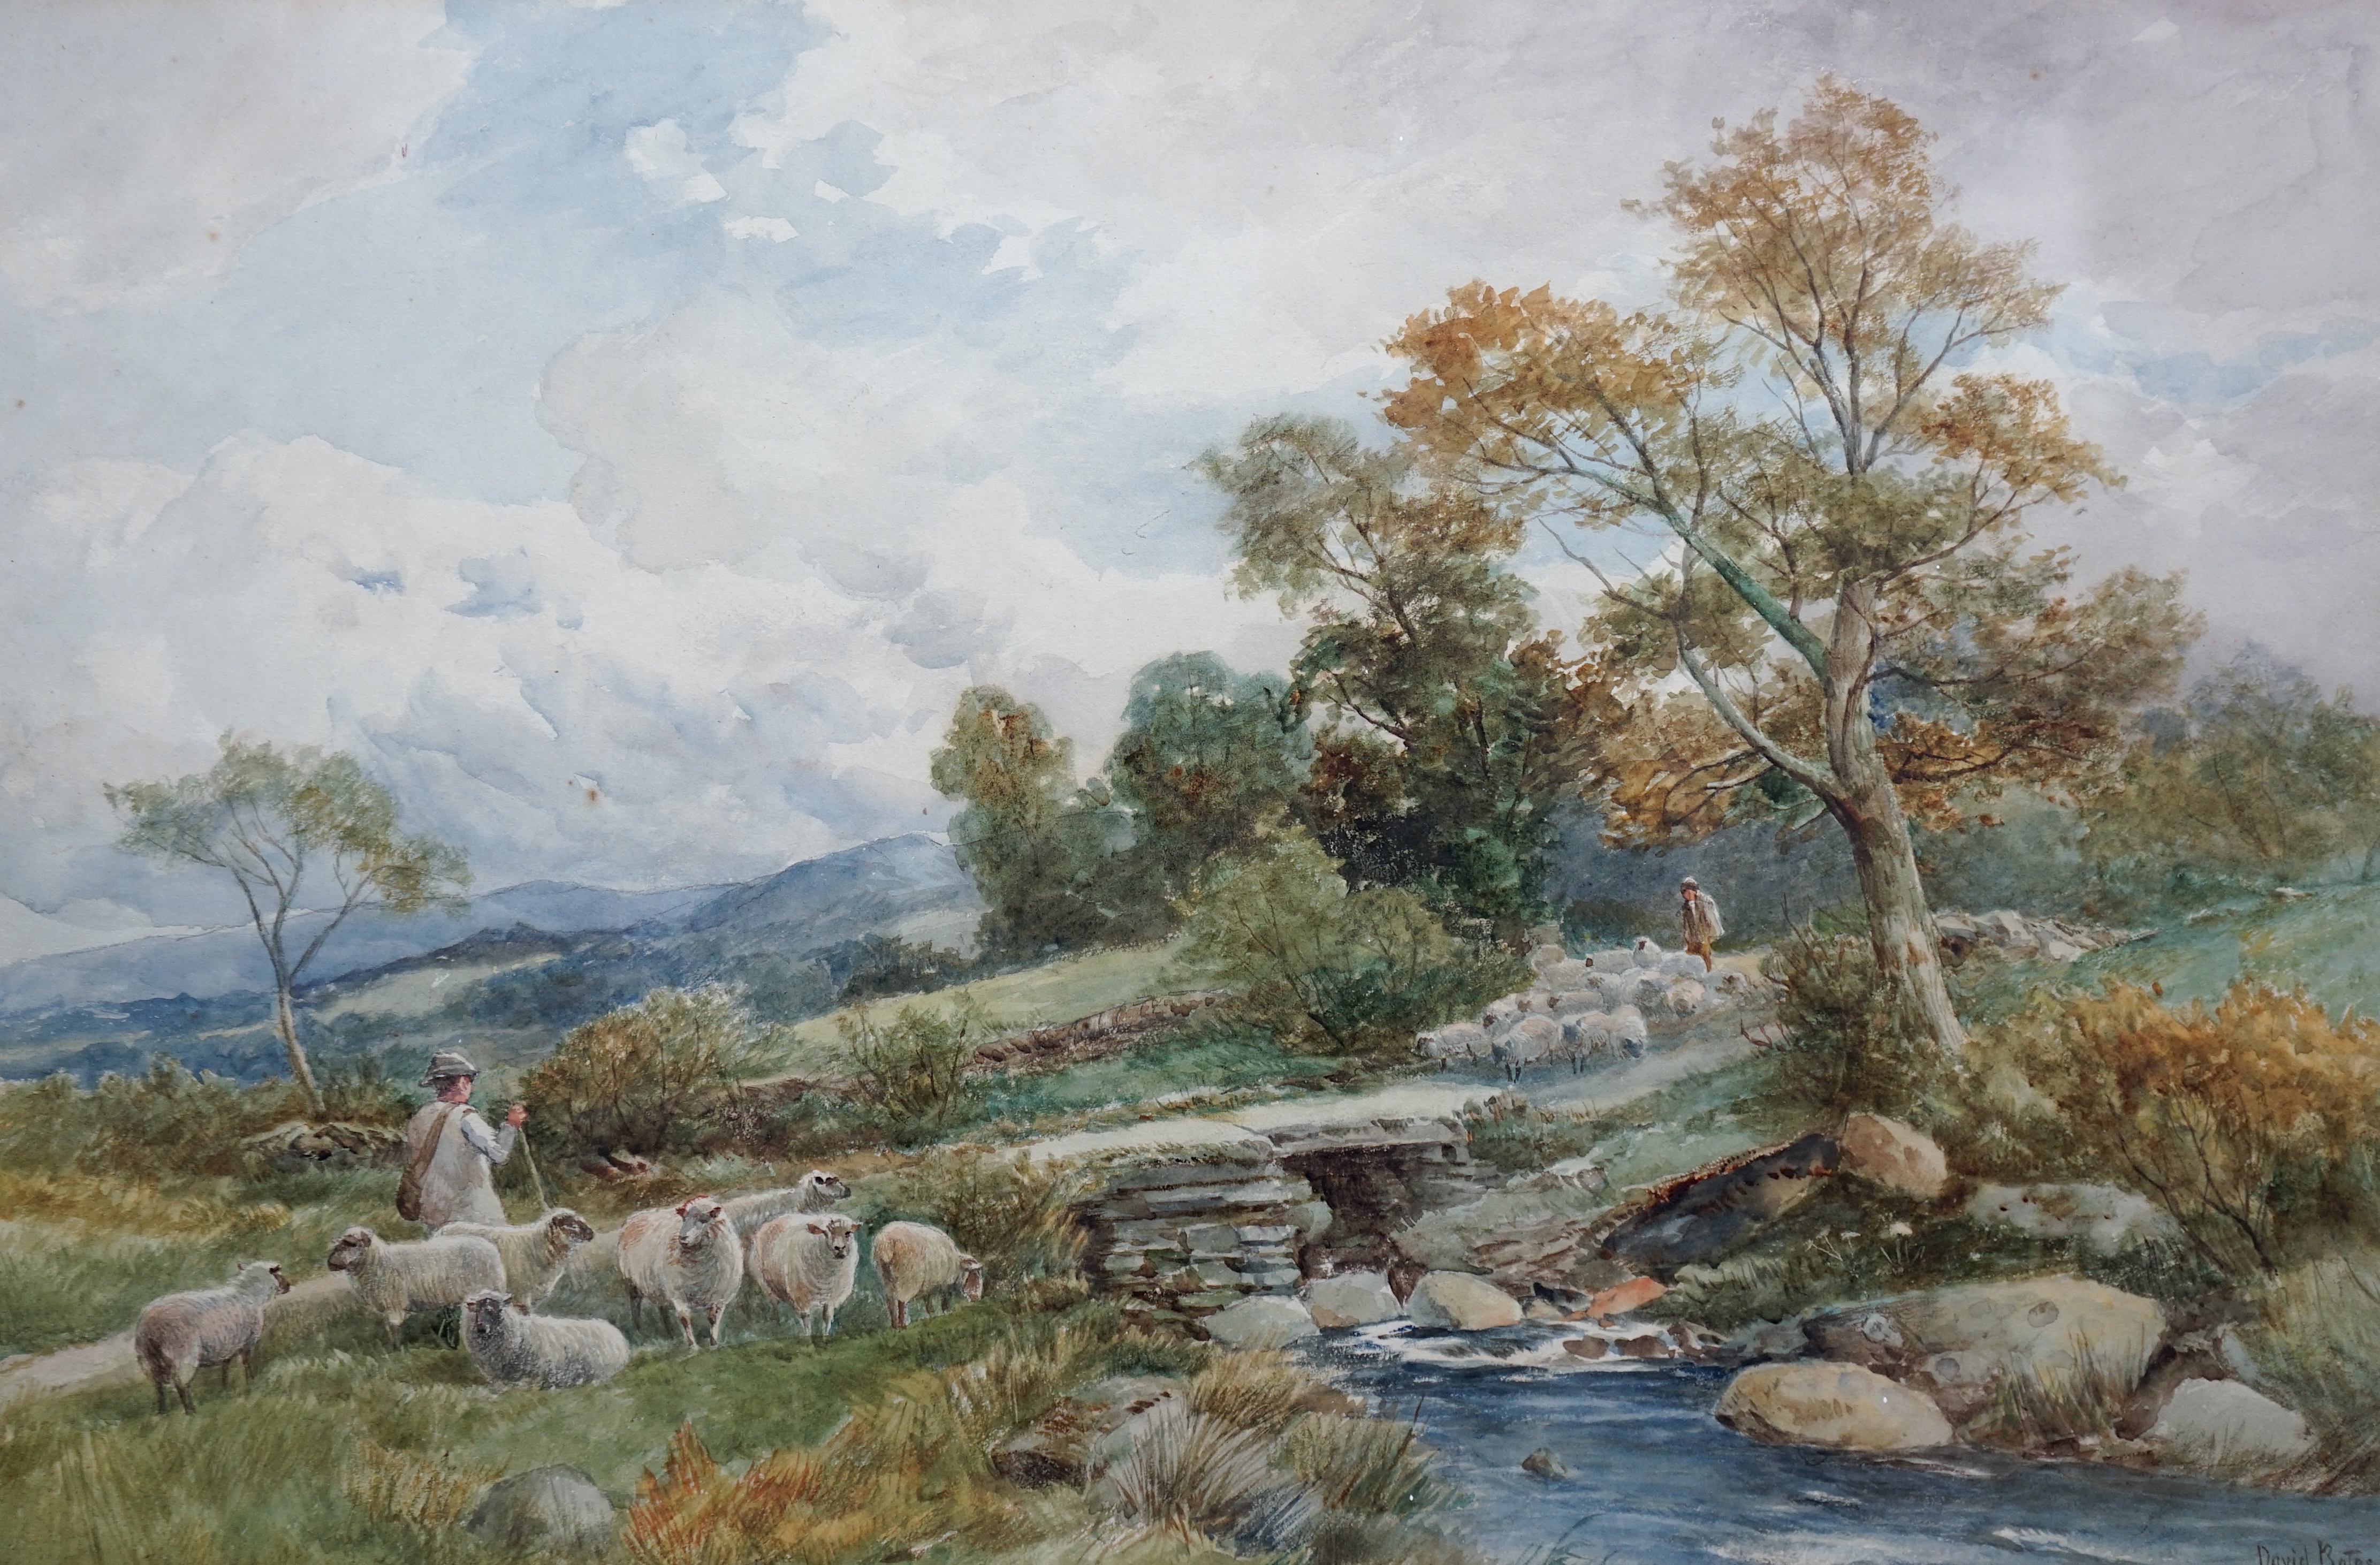 David Bates (British, 1840-1921), watercolour, 'The Brook, Capel Curig, Wales', signed, 34.5 x 52cm. Condition - fair, some spots of foxing and browning